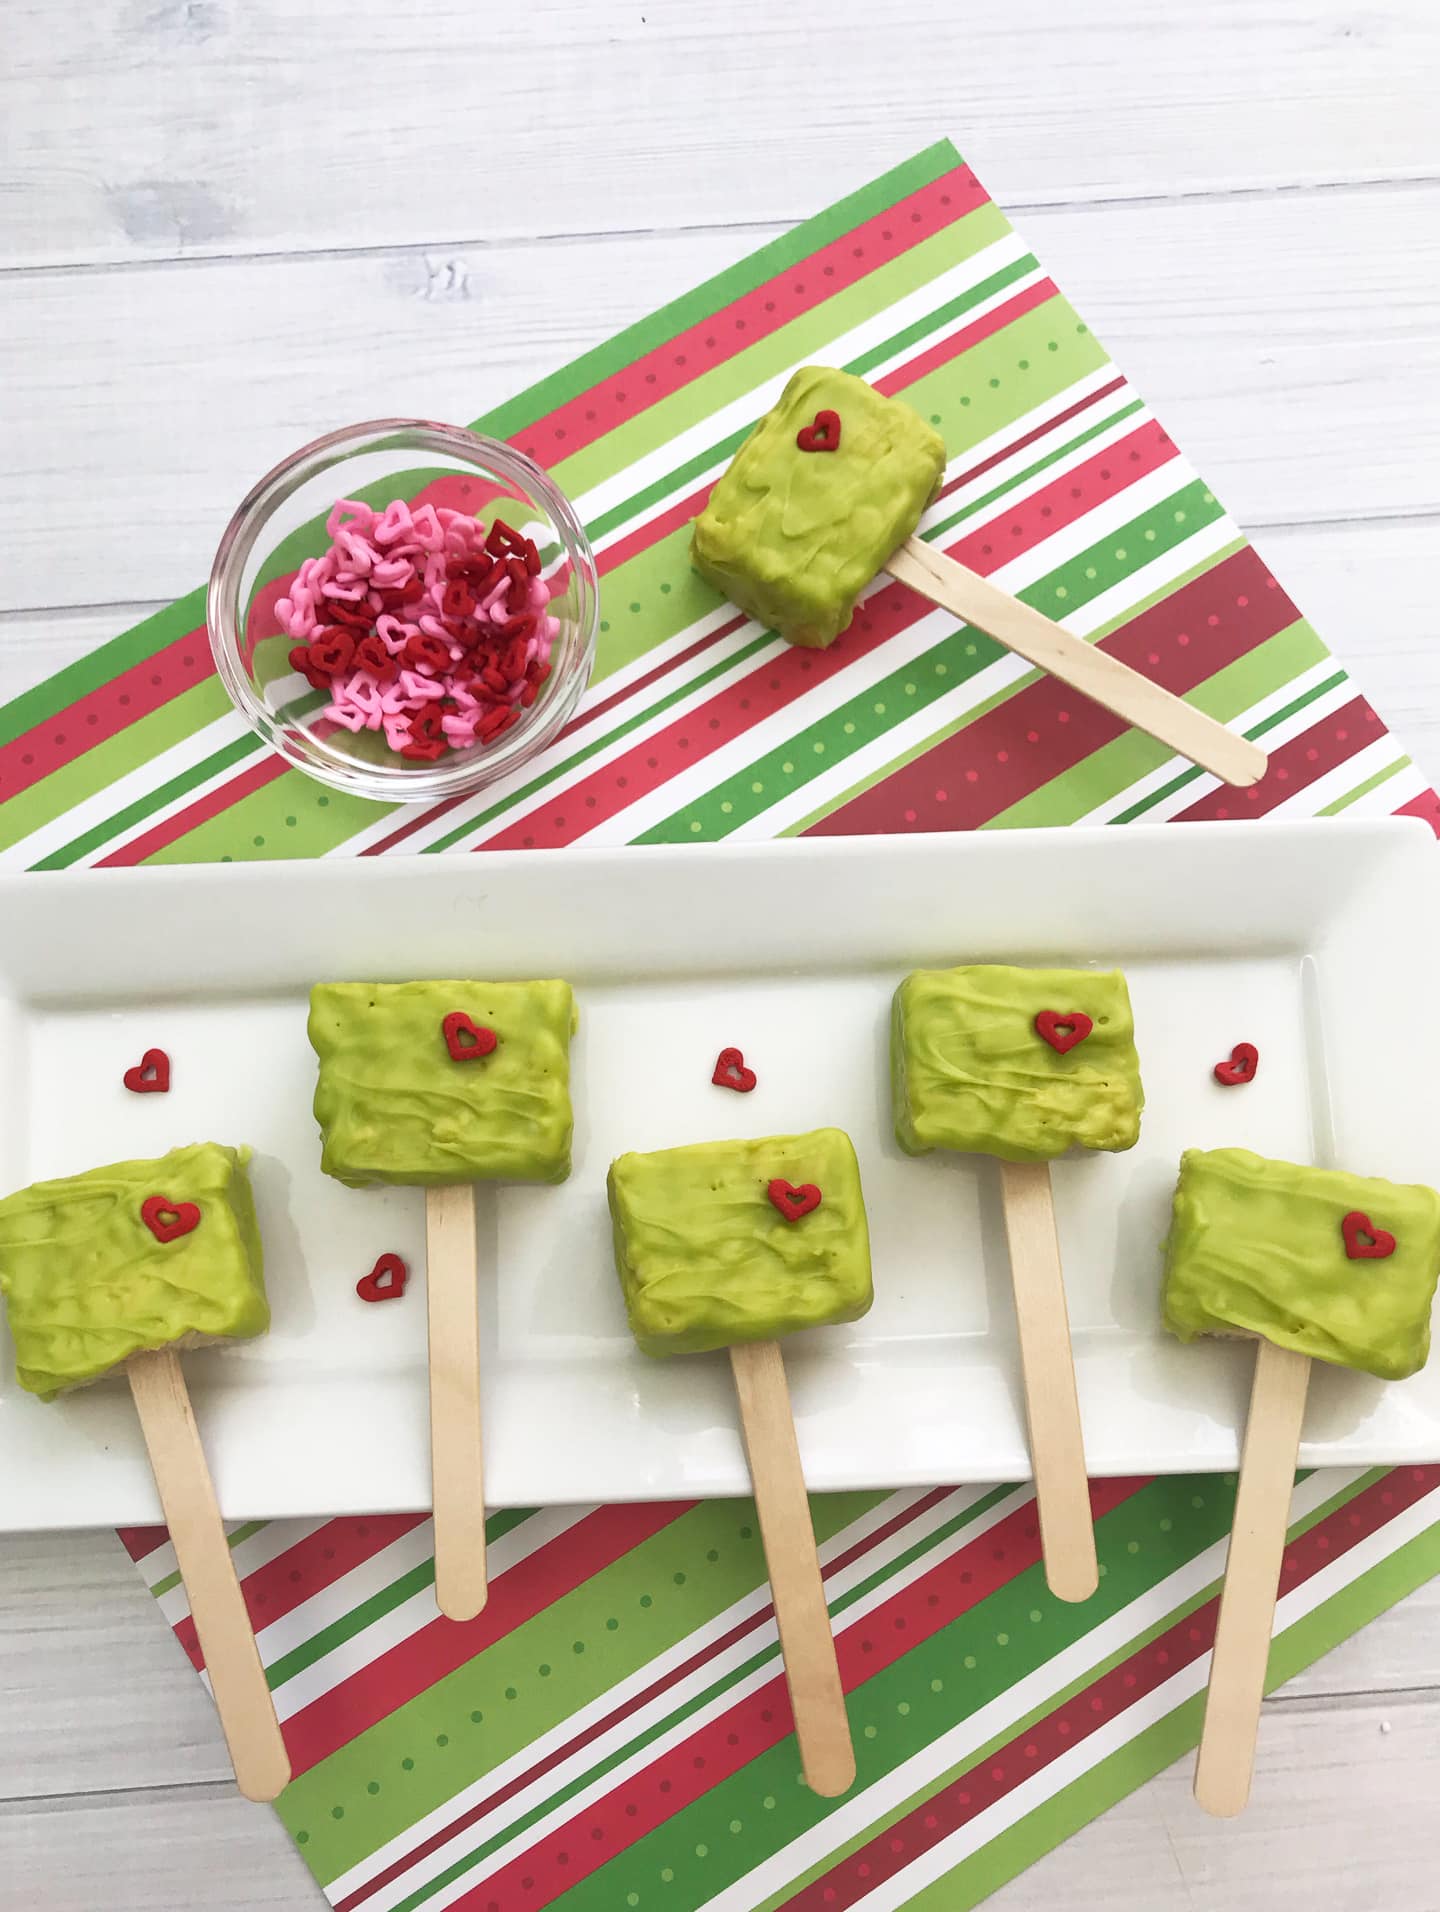 Green Grinch rice krispie pops on a plate with red heart decorations.